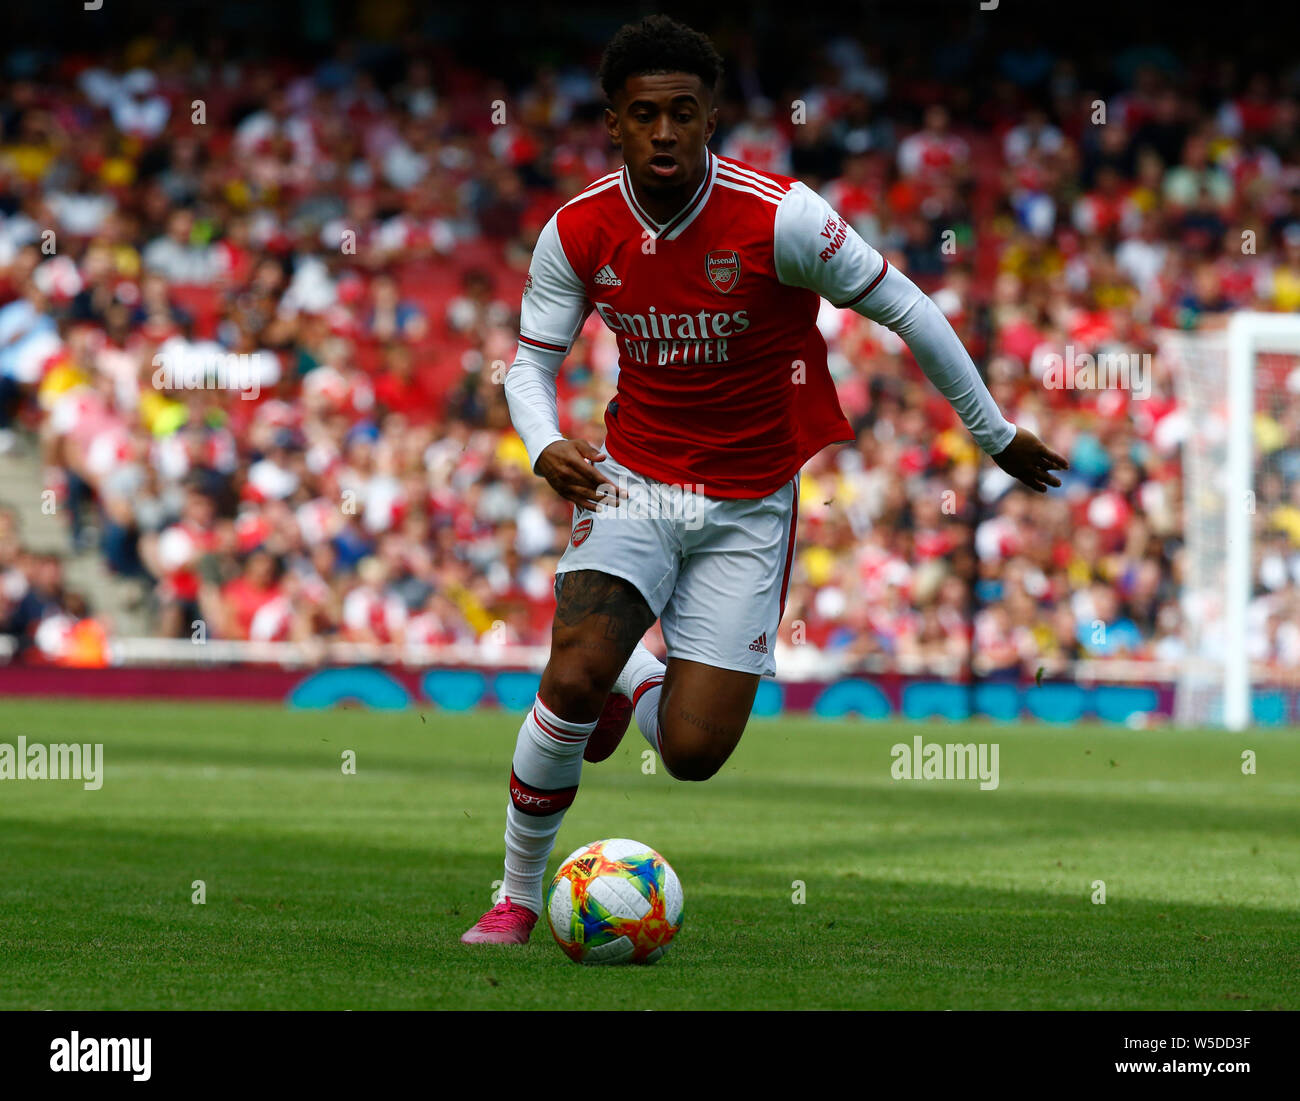 London, UK. 28th July, 2019. London, United Kingdom, JULY 28 Ainsley Maitland-Niles of Arsenal during Emirates Cup Final between Arsenal and Lyon (Olympique Lyonnais )at Emirates stadium, London, England on 28 July 2019. Credit: Action Foto Sport/Alamy Live News Stock Photo